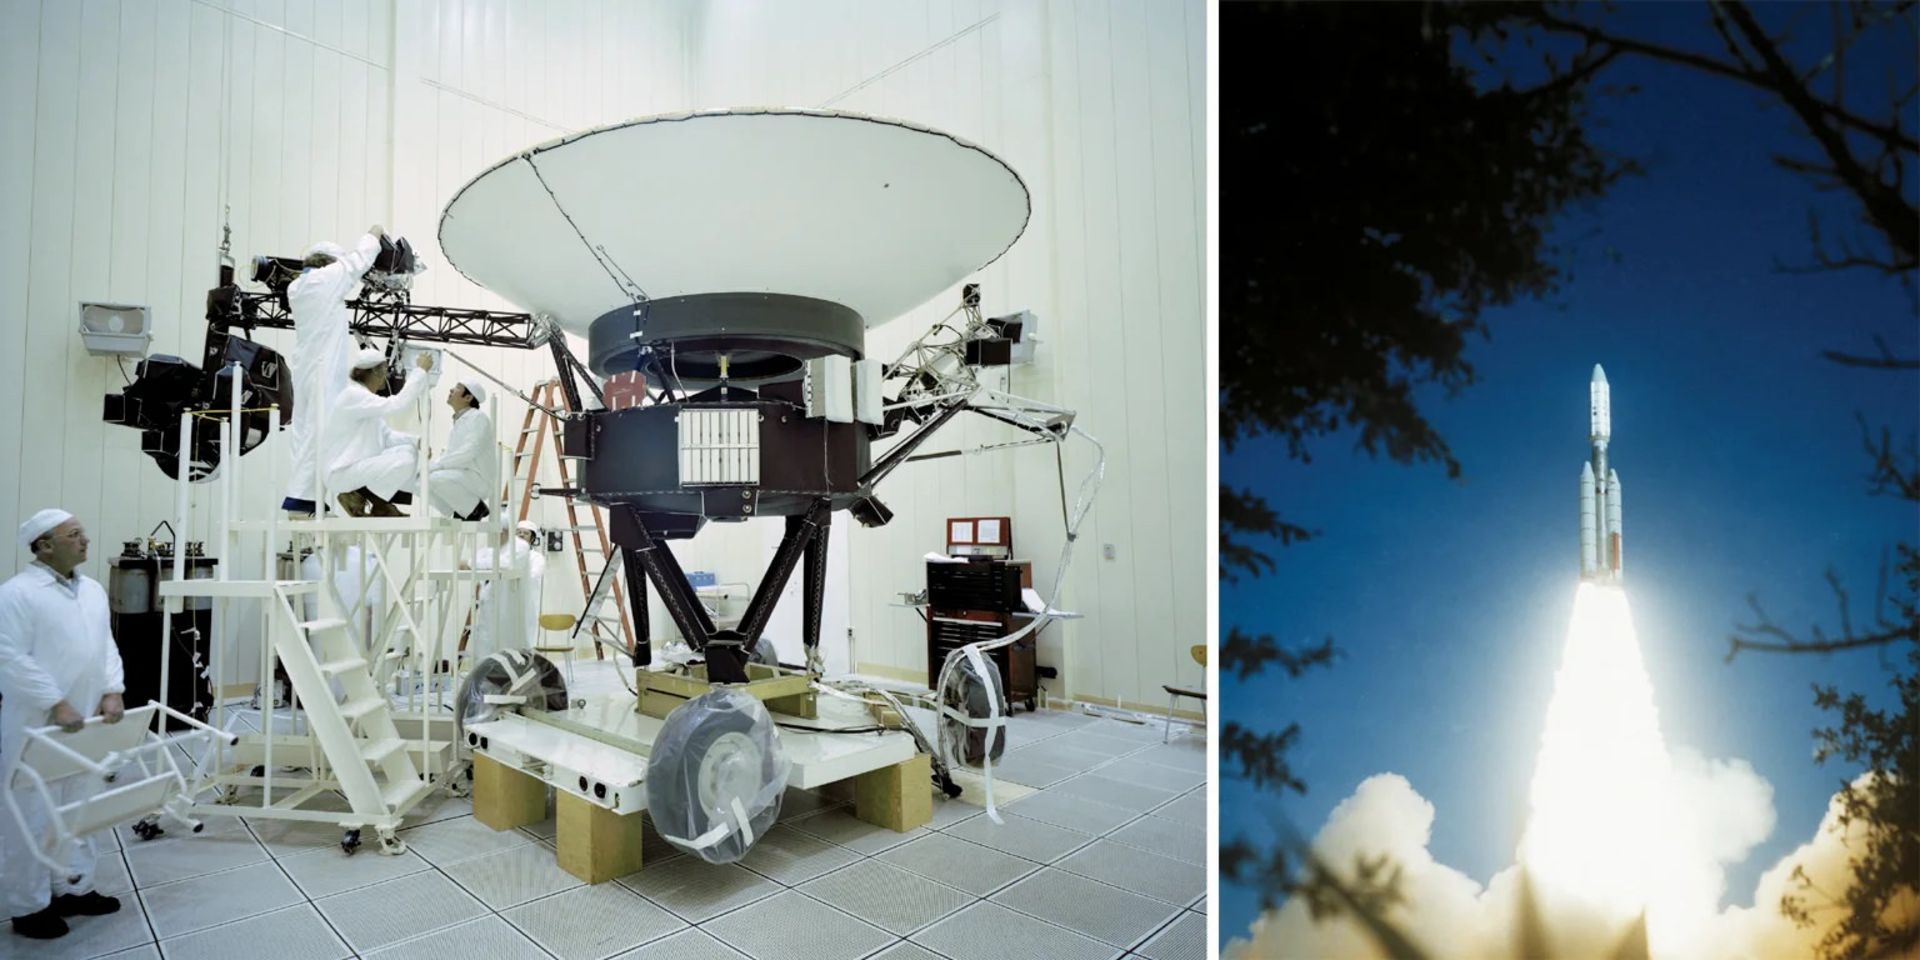 Voyager 2 under test at NASA's Jet Propulsion and Launch Laboratory